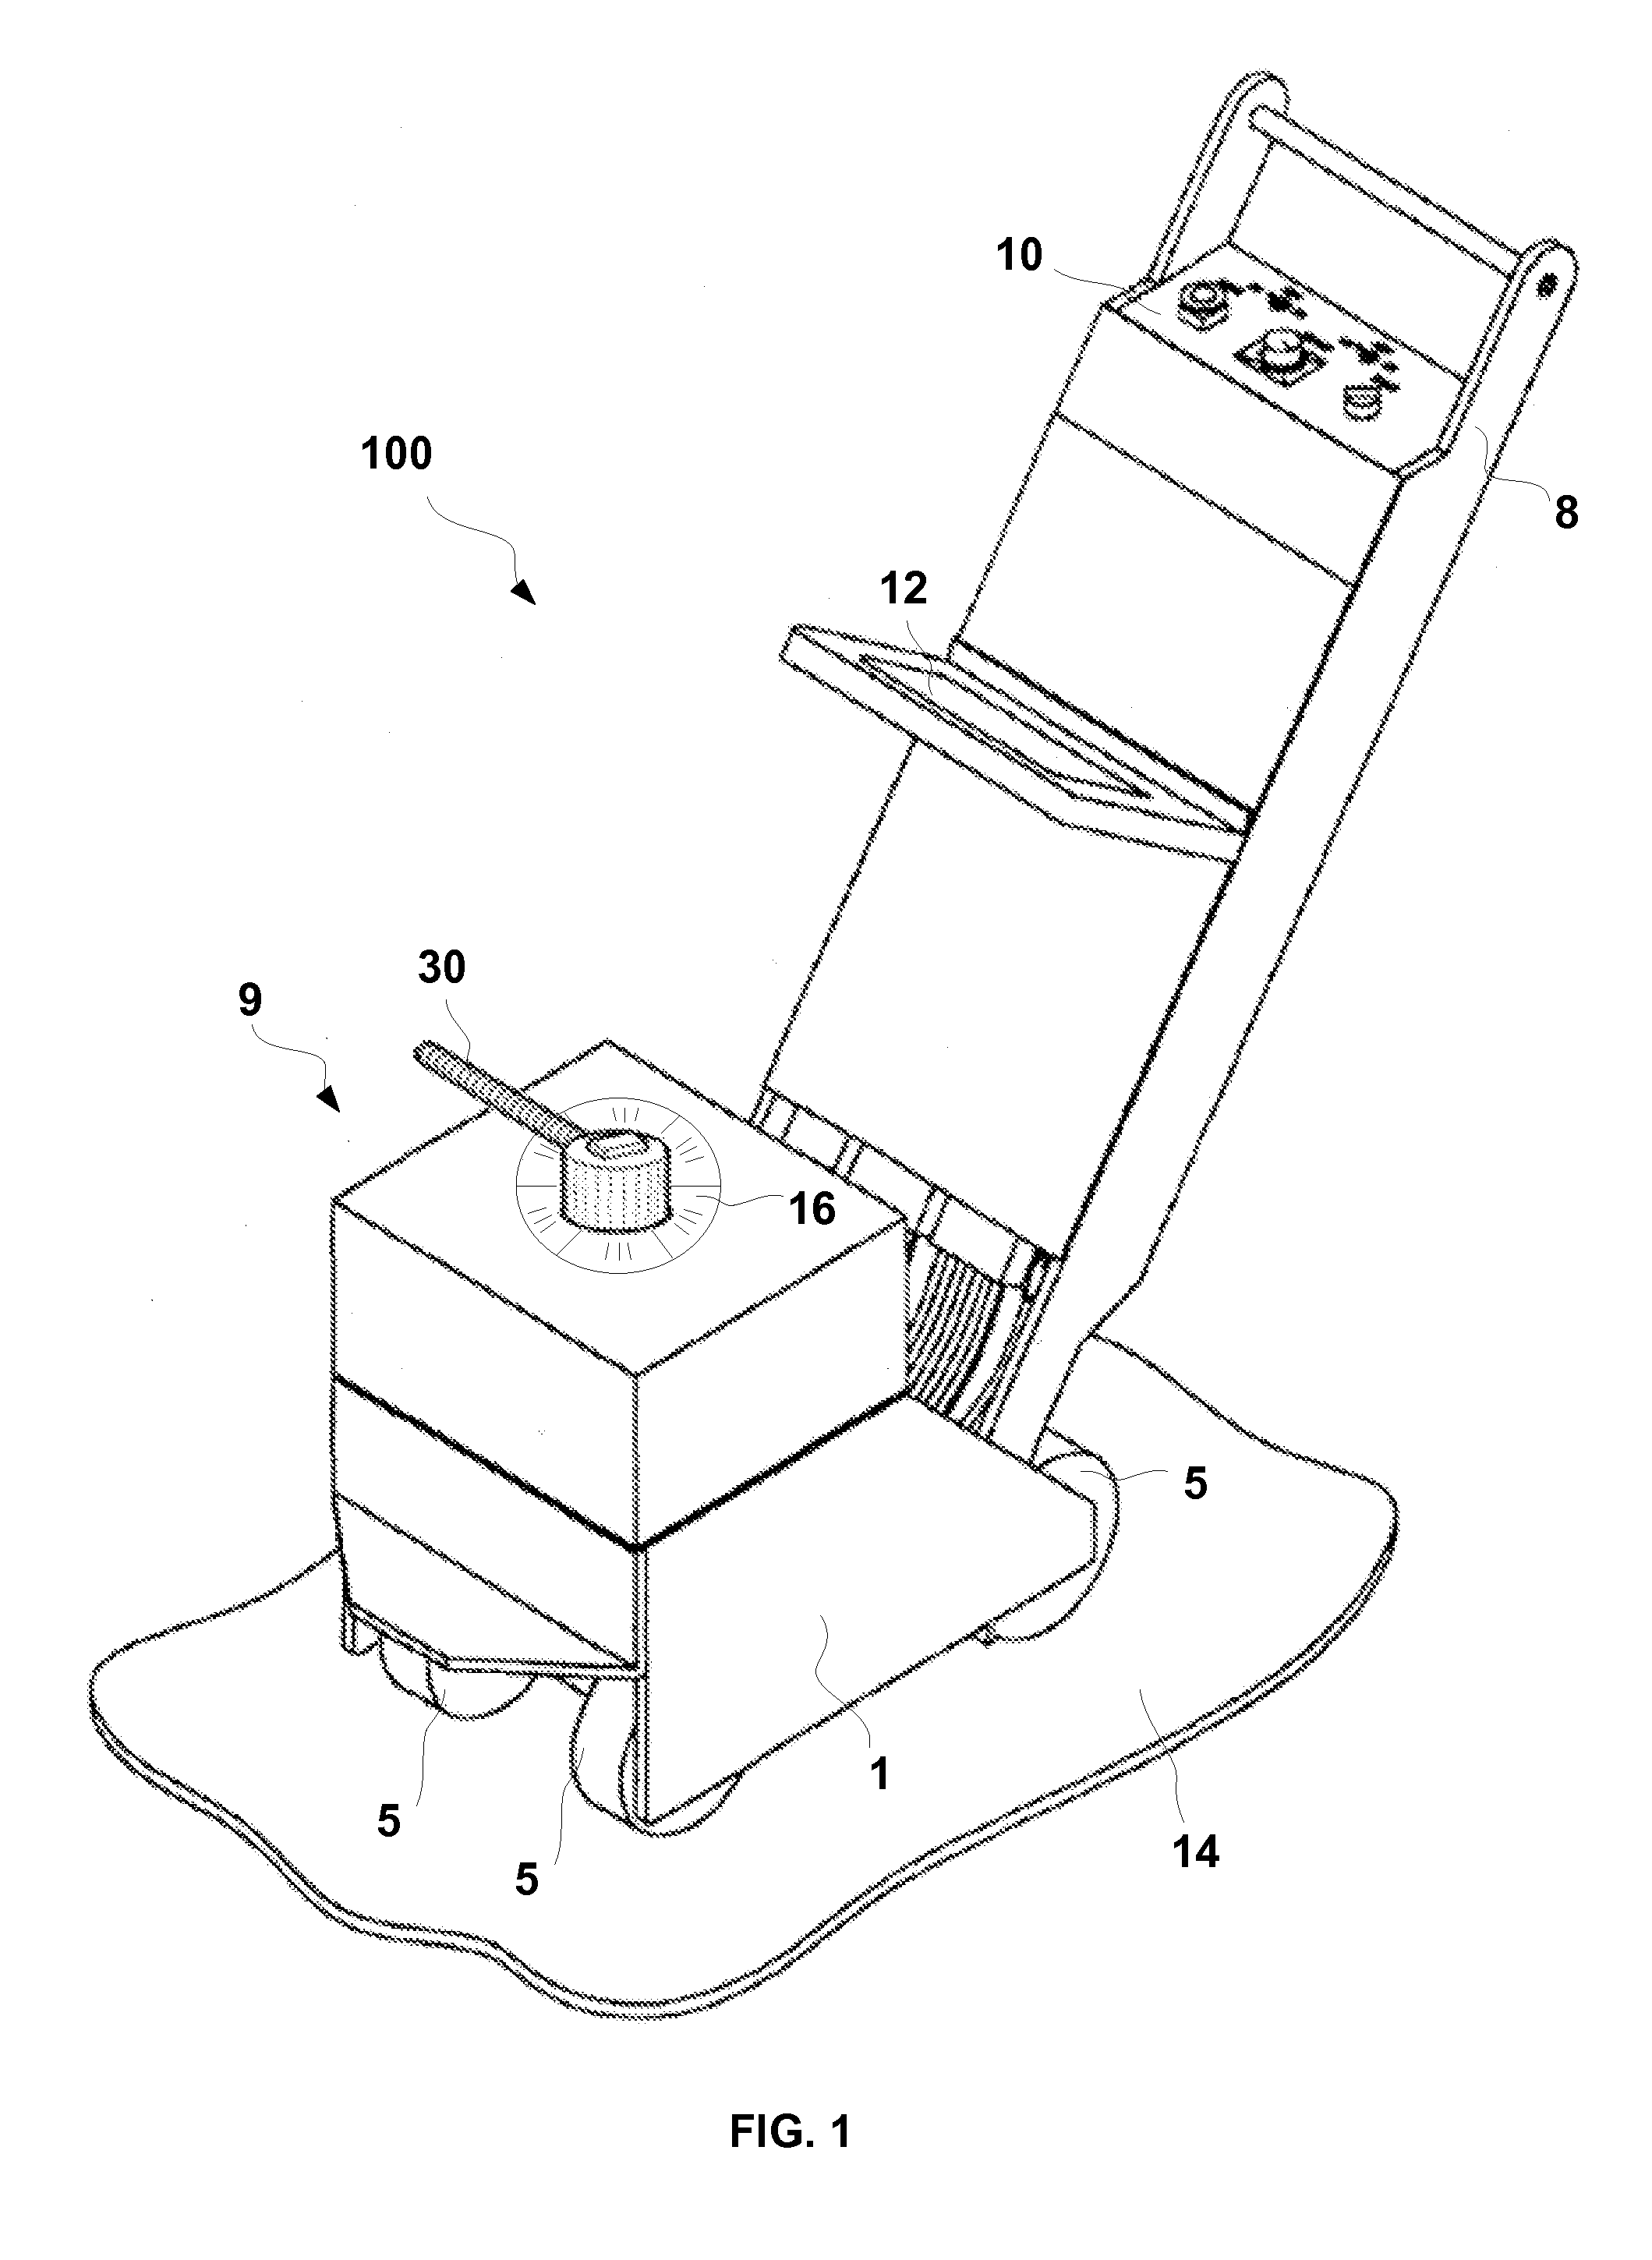 Magnetic flux leakage inspection device